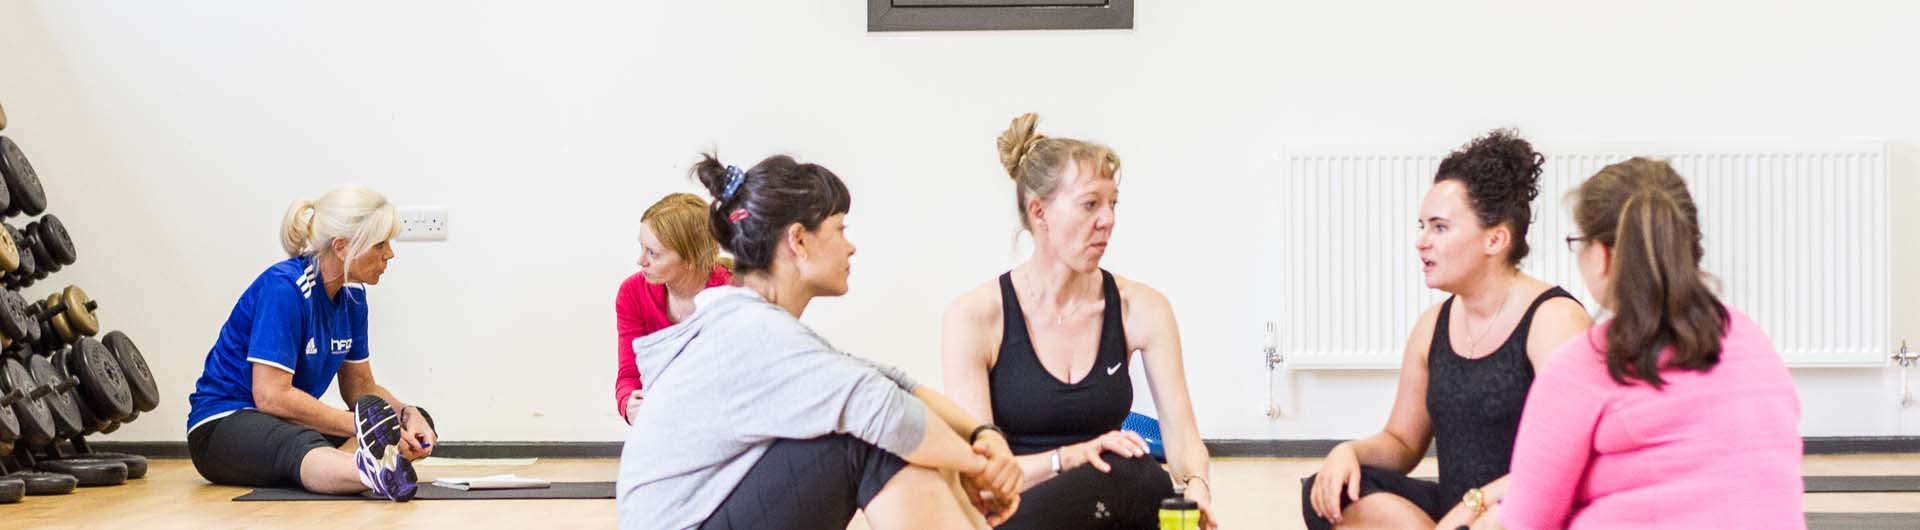 A HFE Pilates course teacher speaks to a student (left) and a circle of four students sit in discussion (right).